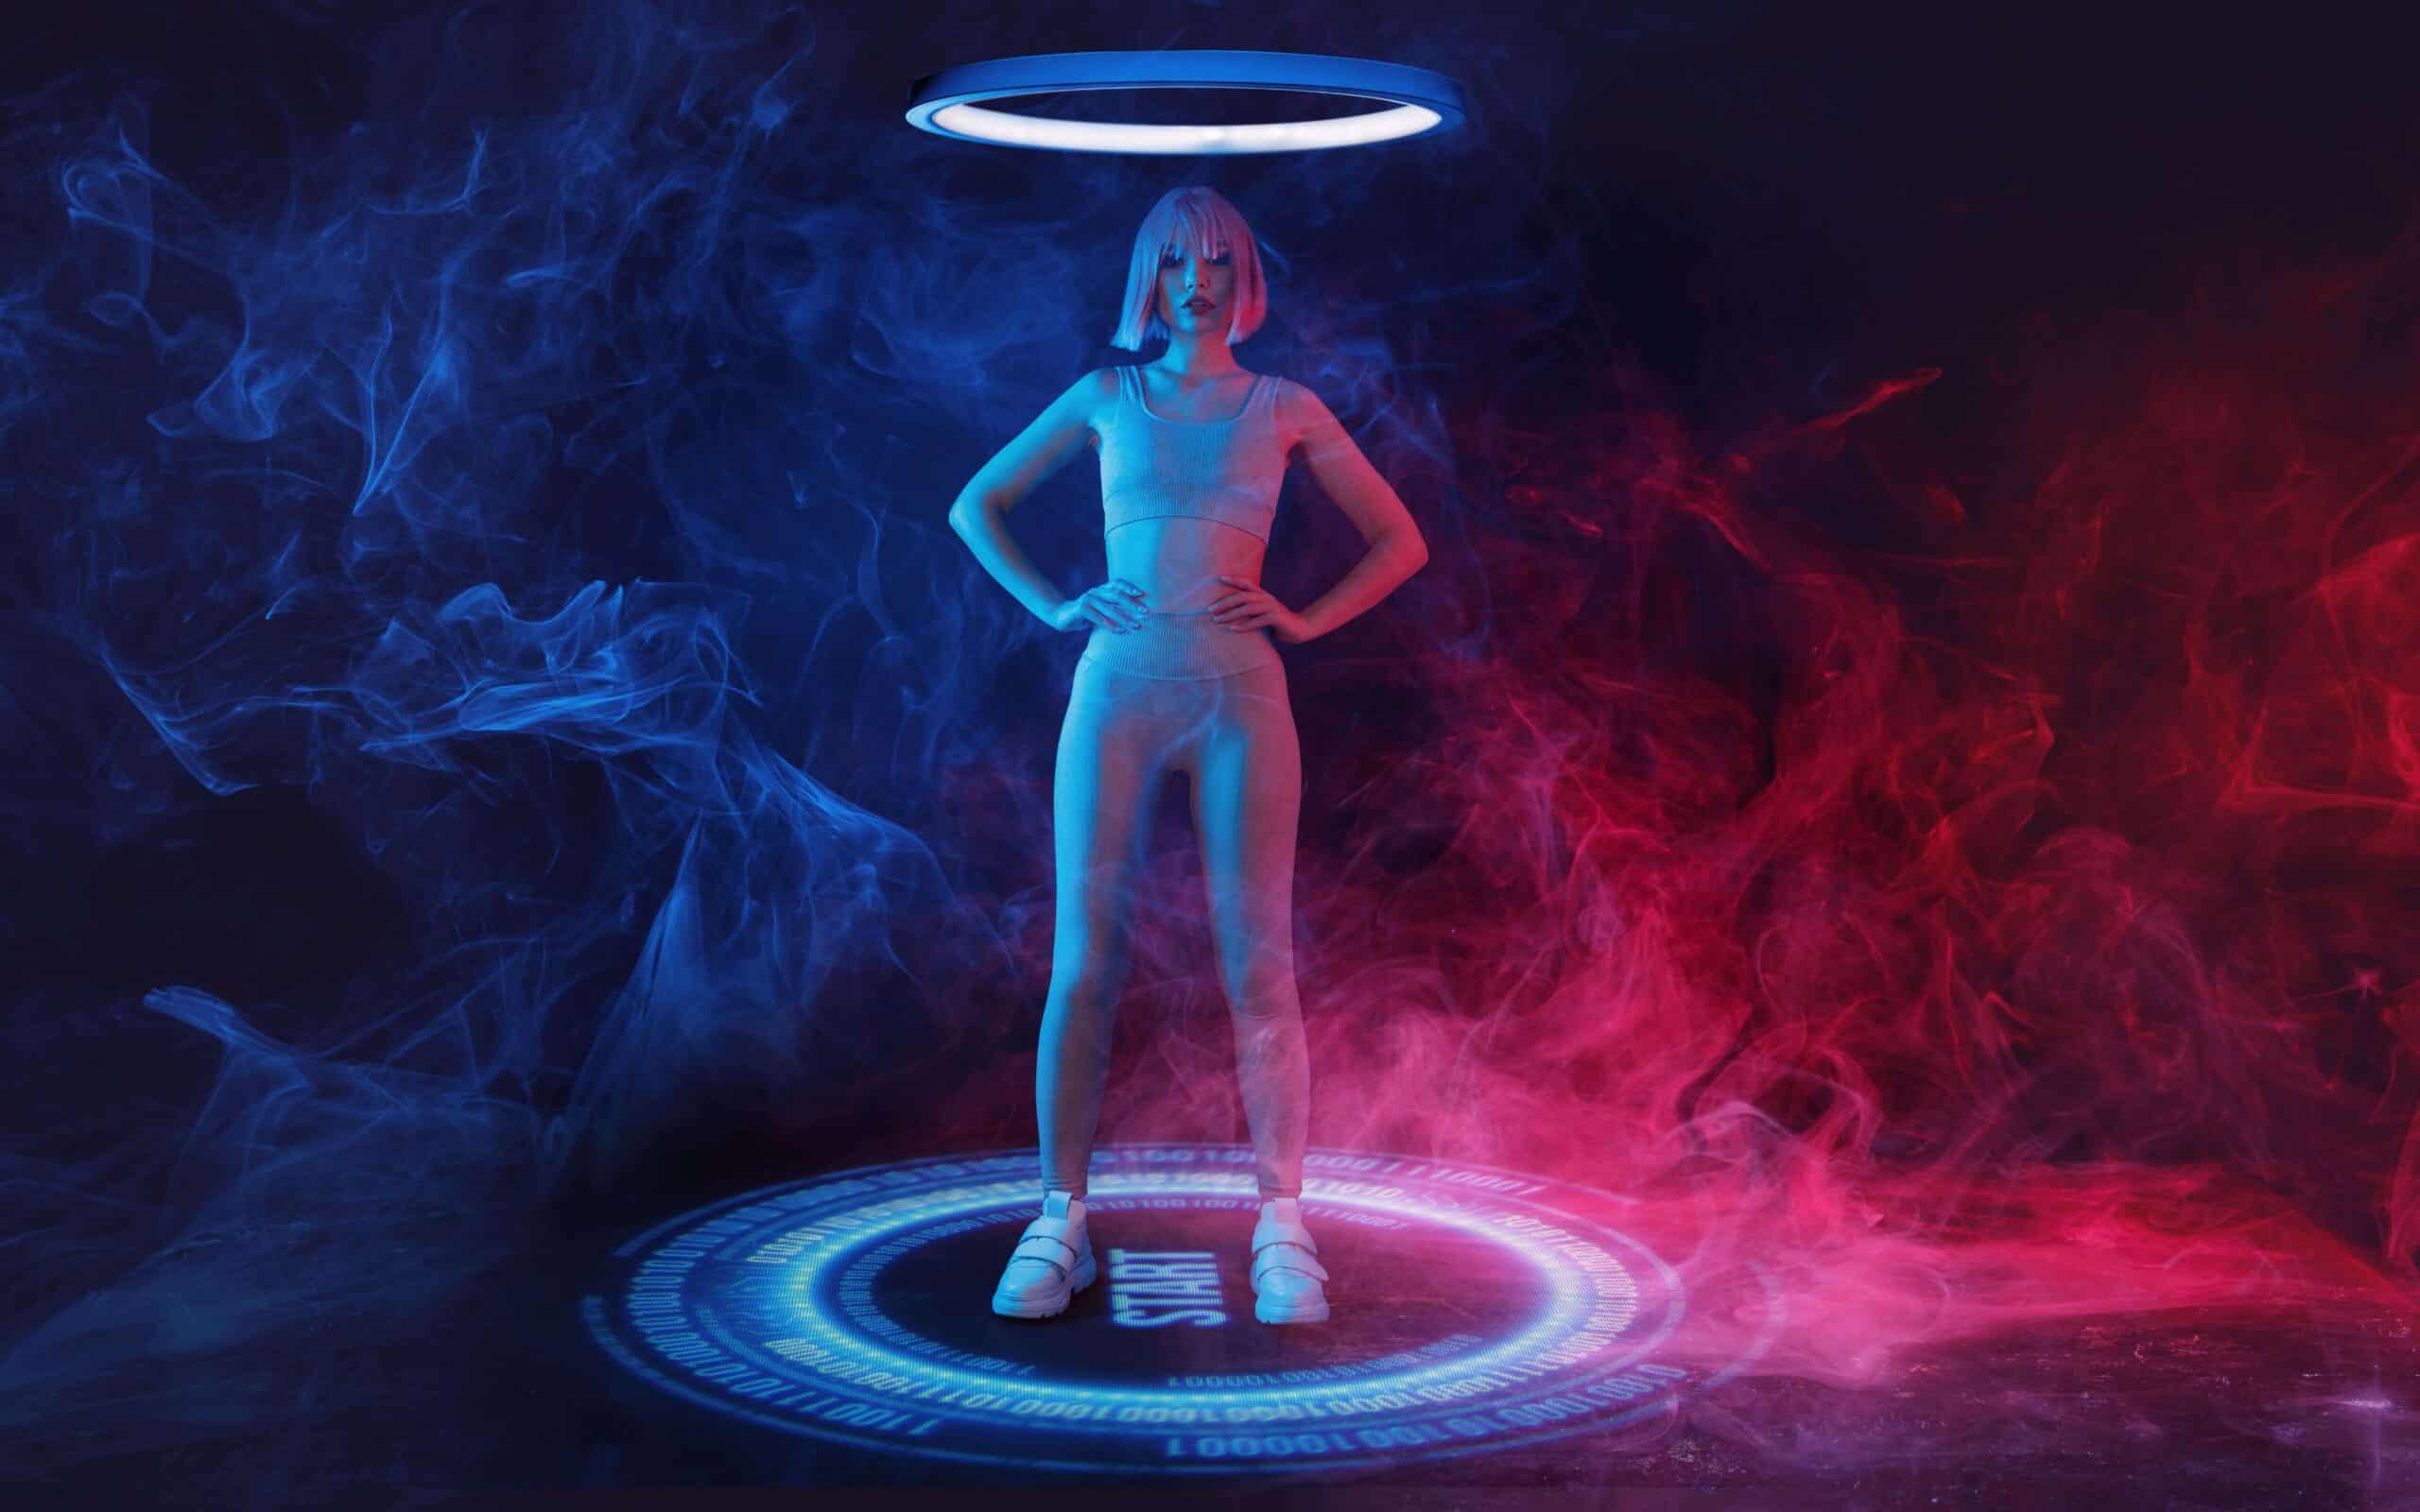 A virtual persona standing in a digital circle in a cloud of red and blue smoke